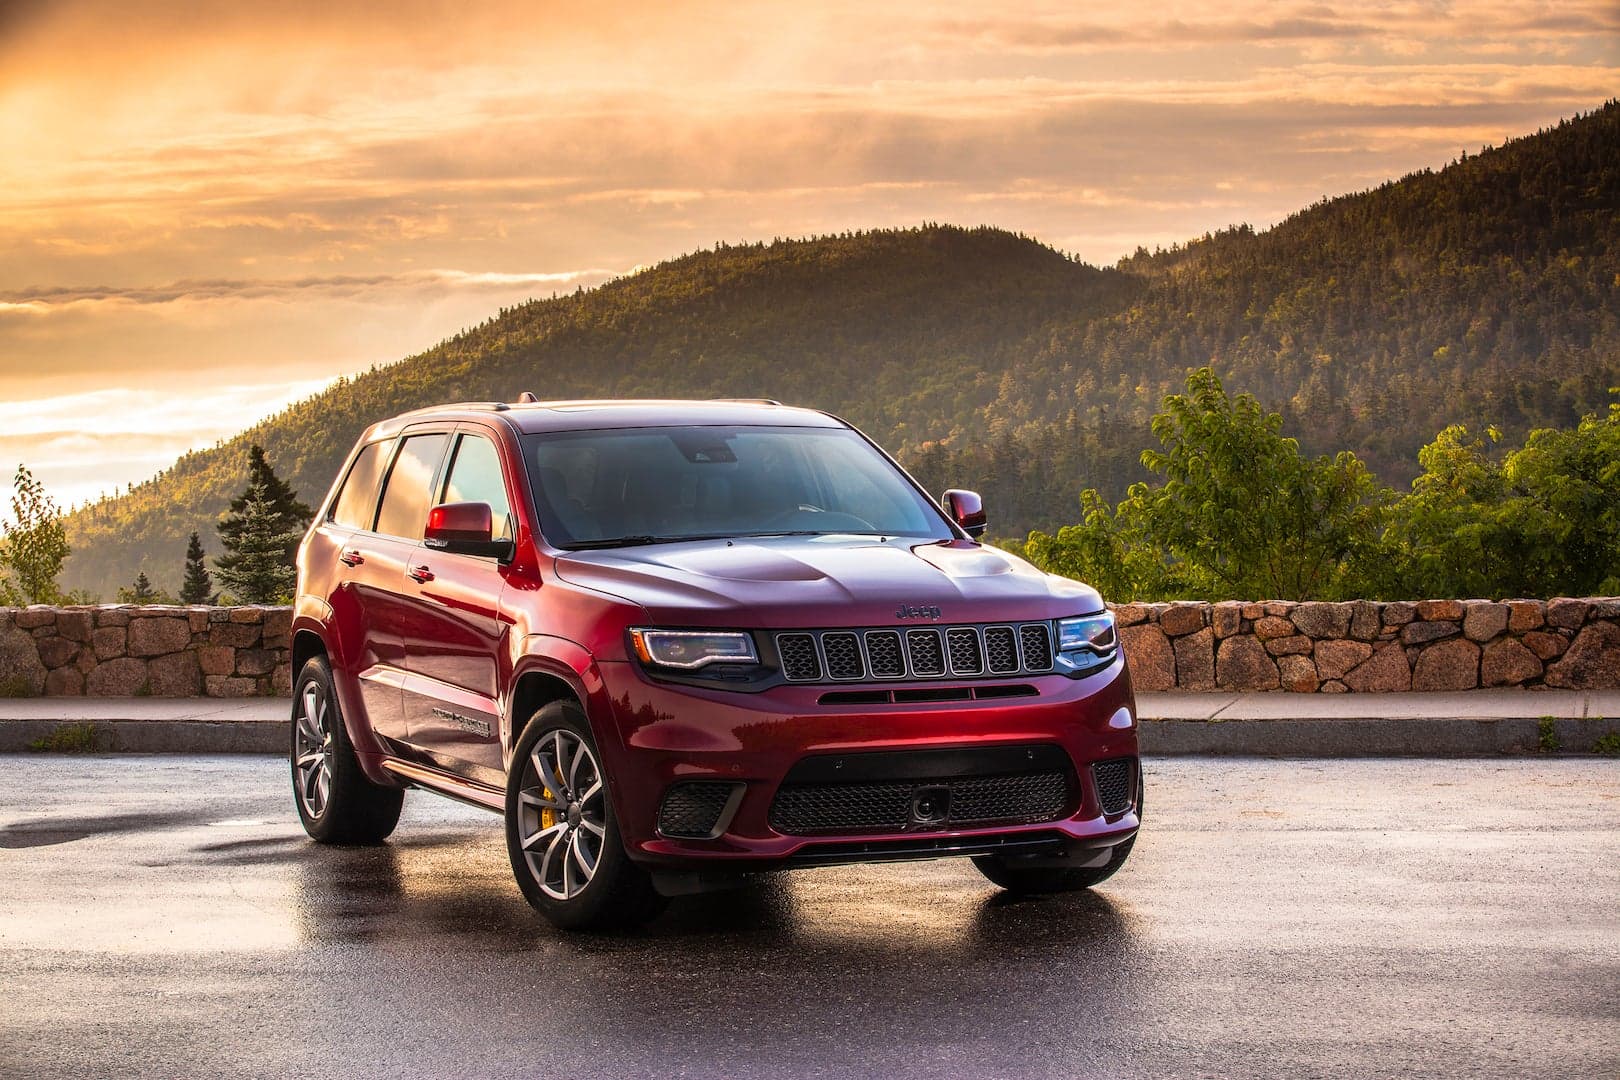 The 2018 Jeep Grand Cherokee Trackhawk Delivers a Street Beatdown